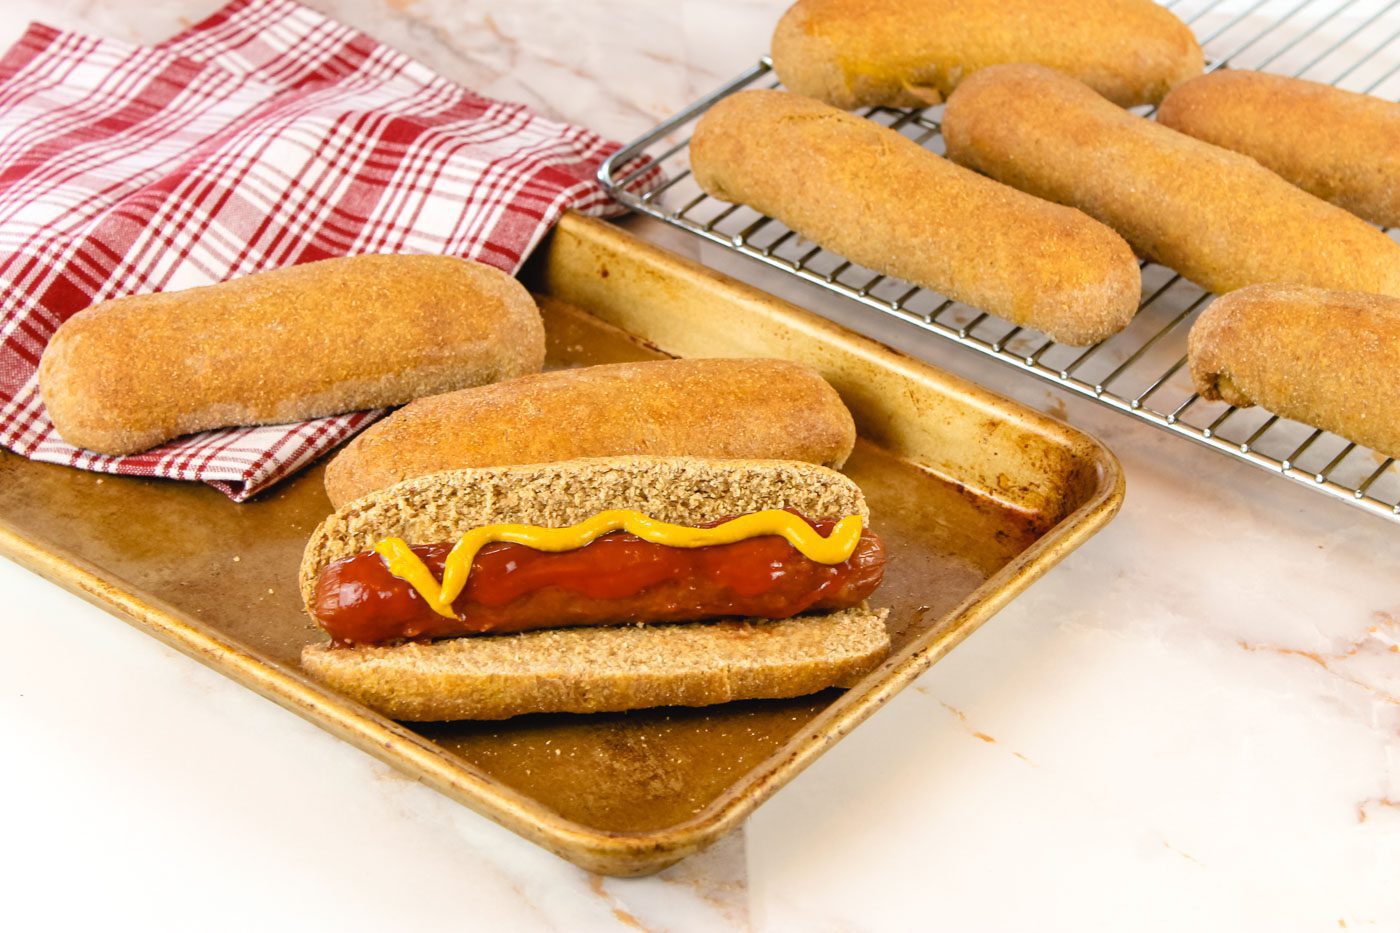 several hot dog buns sit scattered on a kitchen countertop, one is slit open and filled with a grilled hot dog with ketchup and mustard